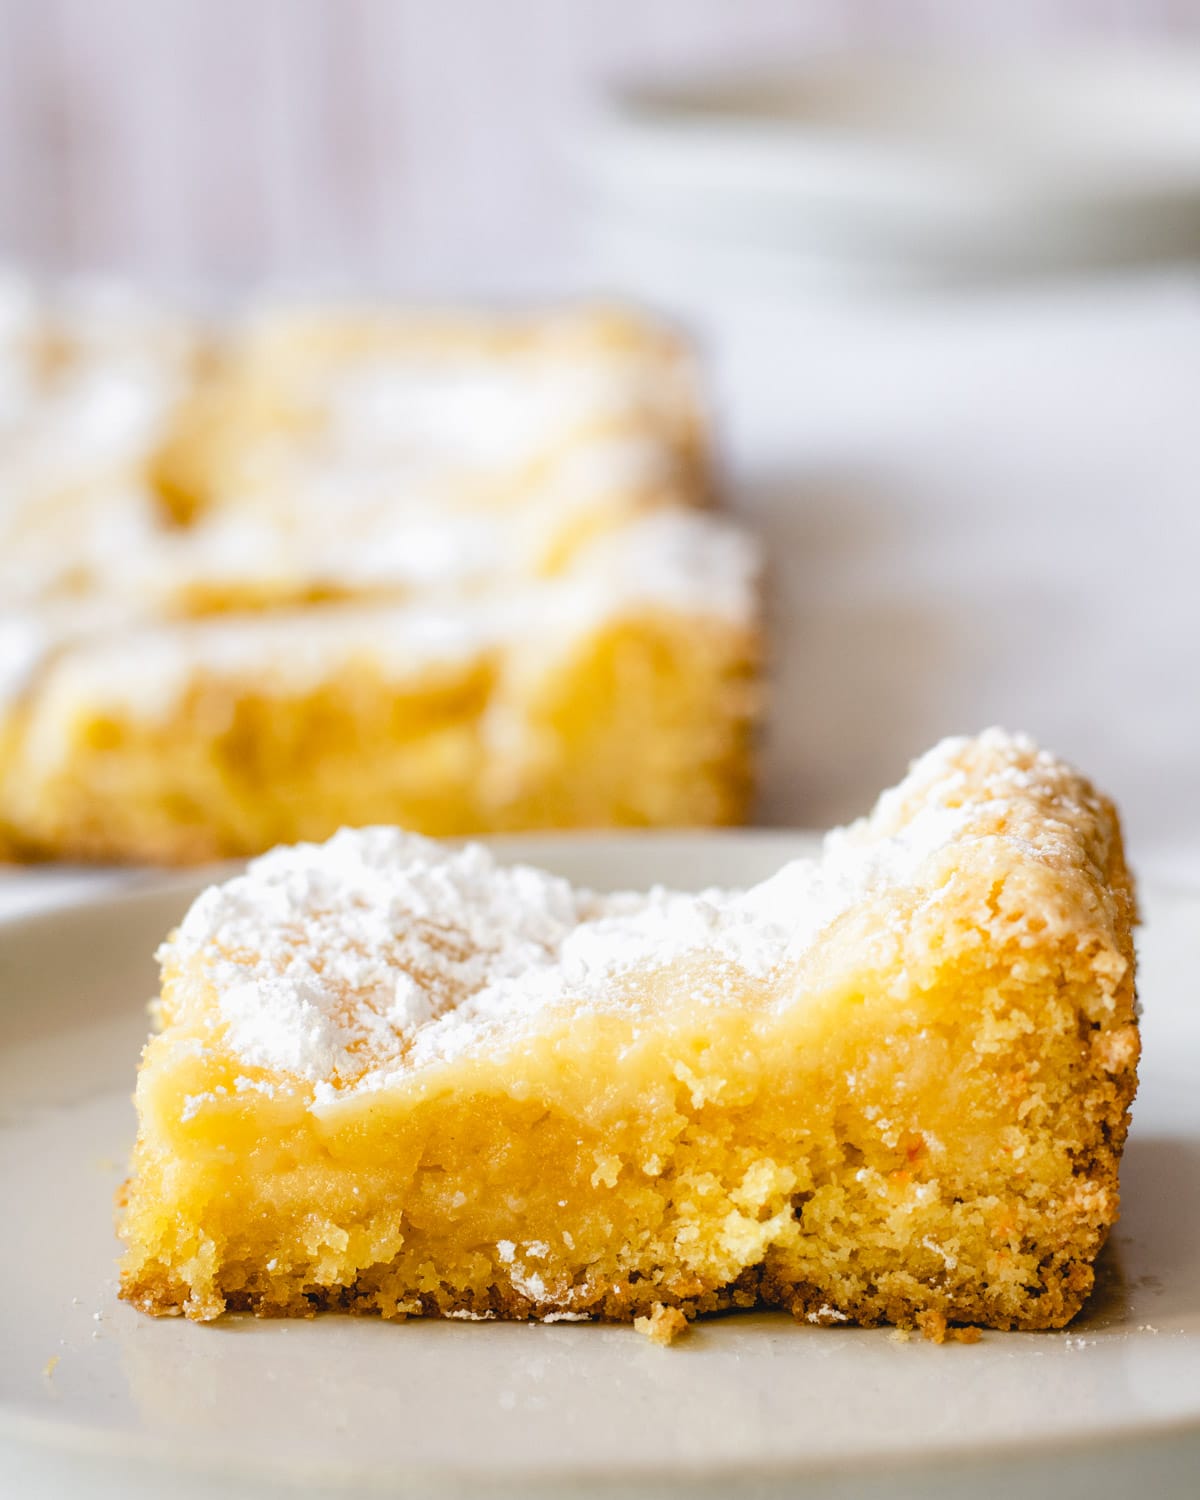 One square of gooey butter cake on a plate with the remaining cake in the background,